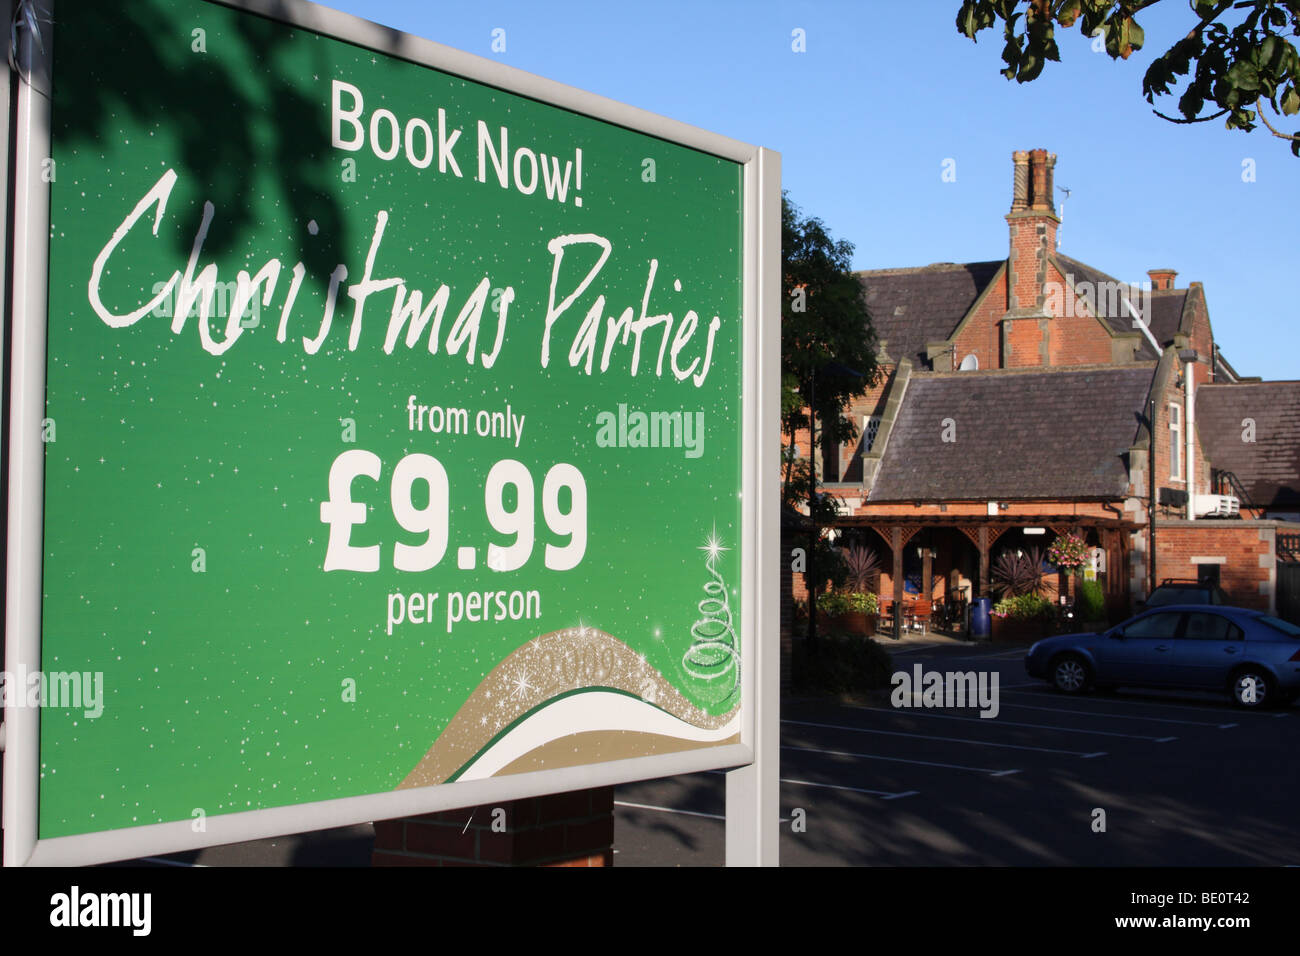 A sign advertising Christmas parties at a public house in the U.K. Stock Photo